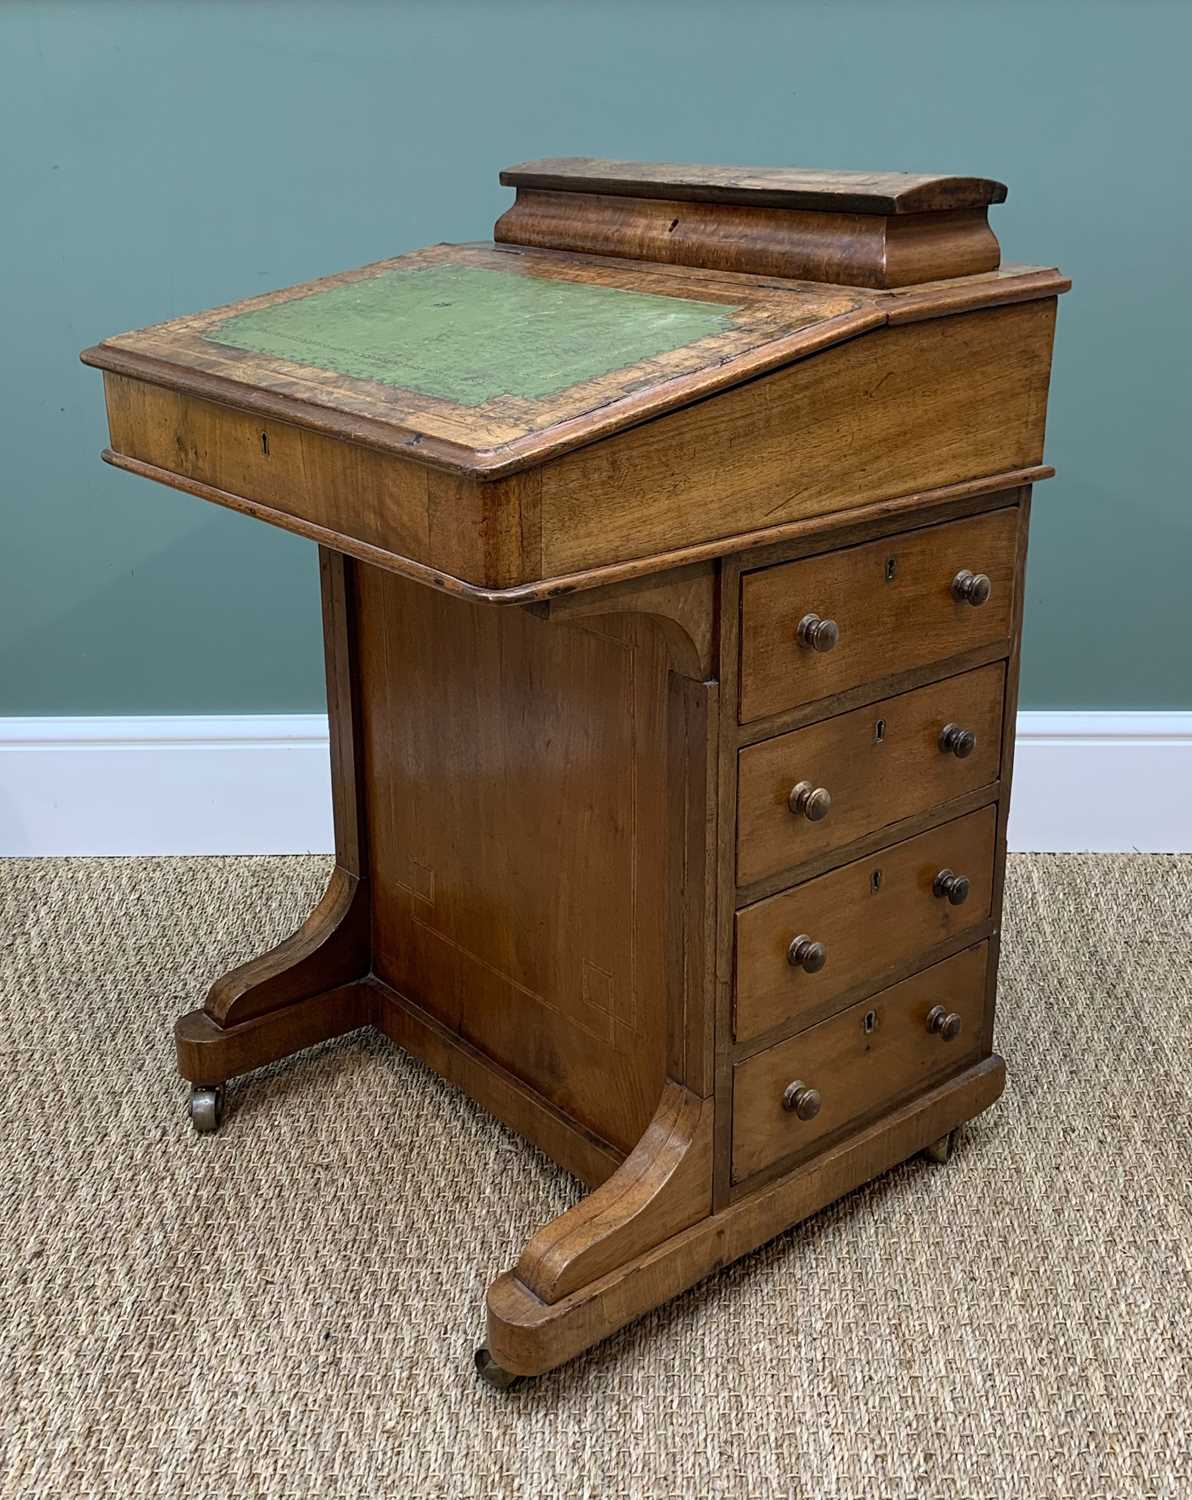 LATE VICTORIAN WALNUT DAVENPORT DESK, satinwood cross-banded decoration with stationery - Image 2 of 5